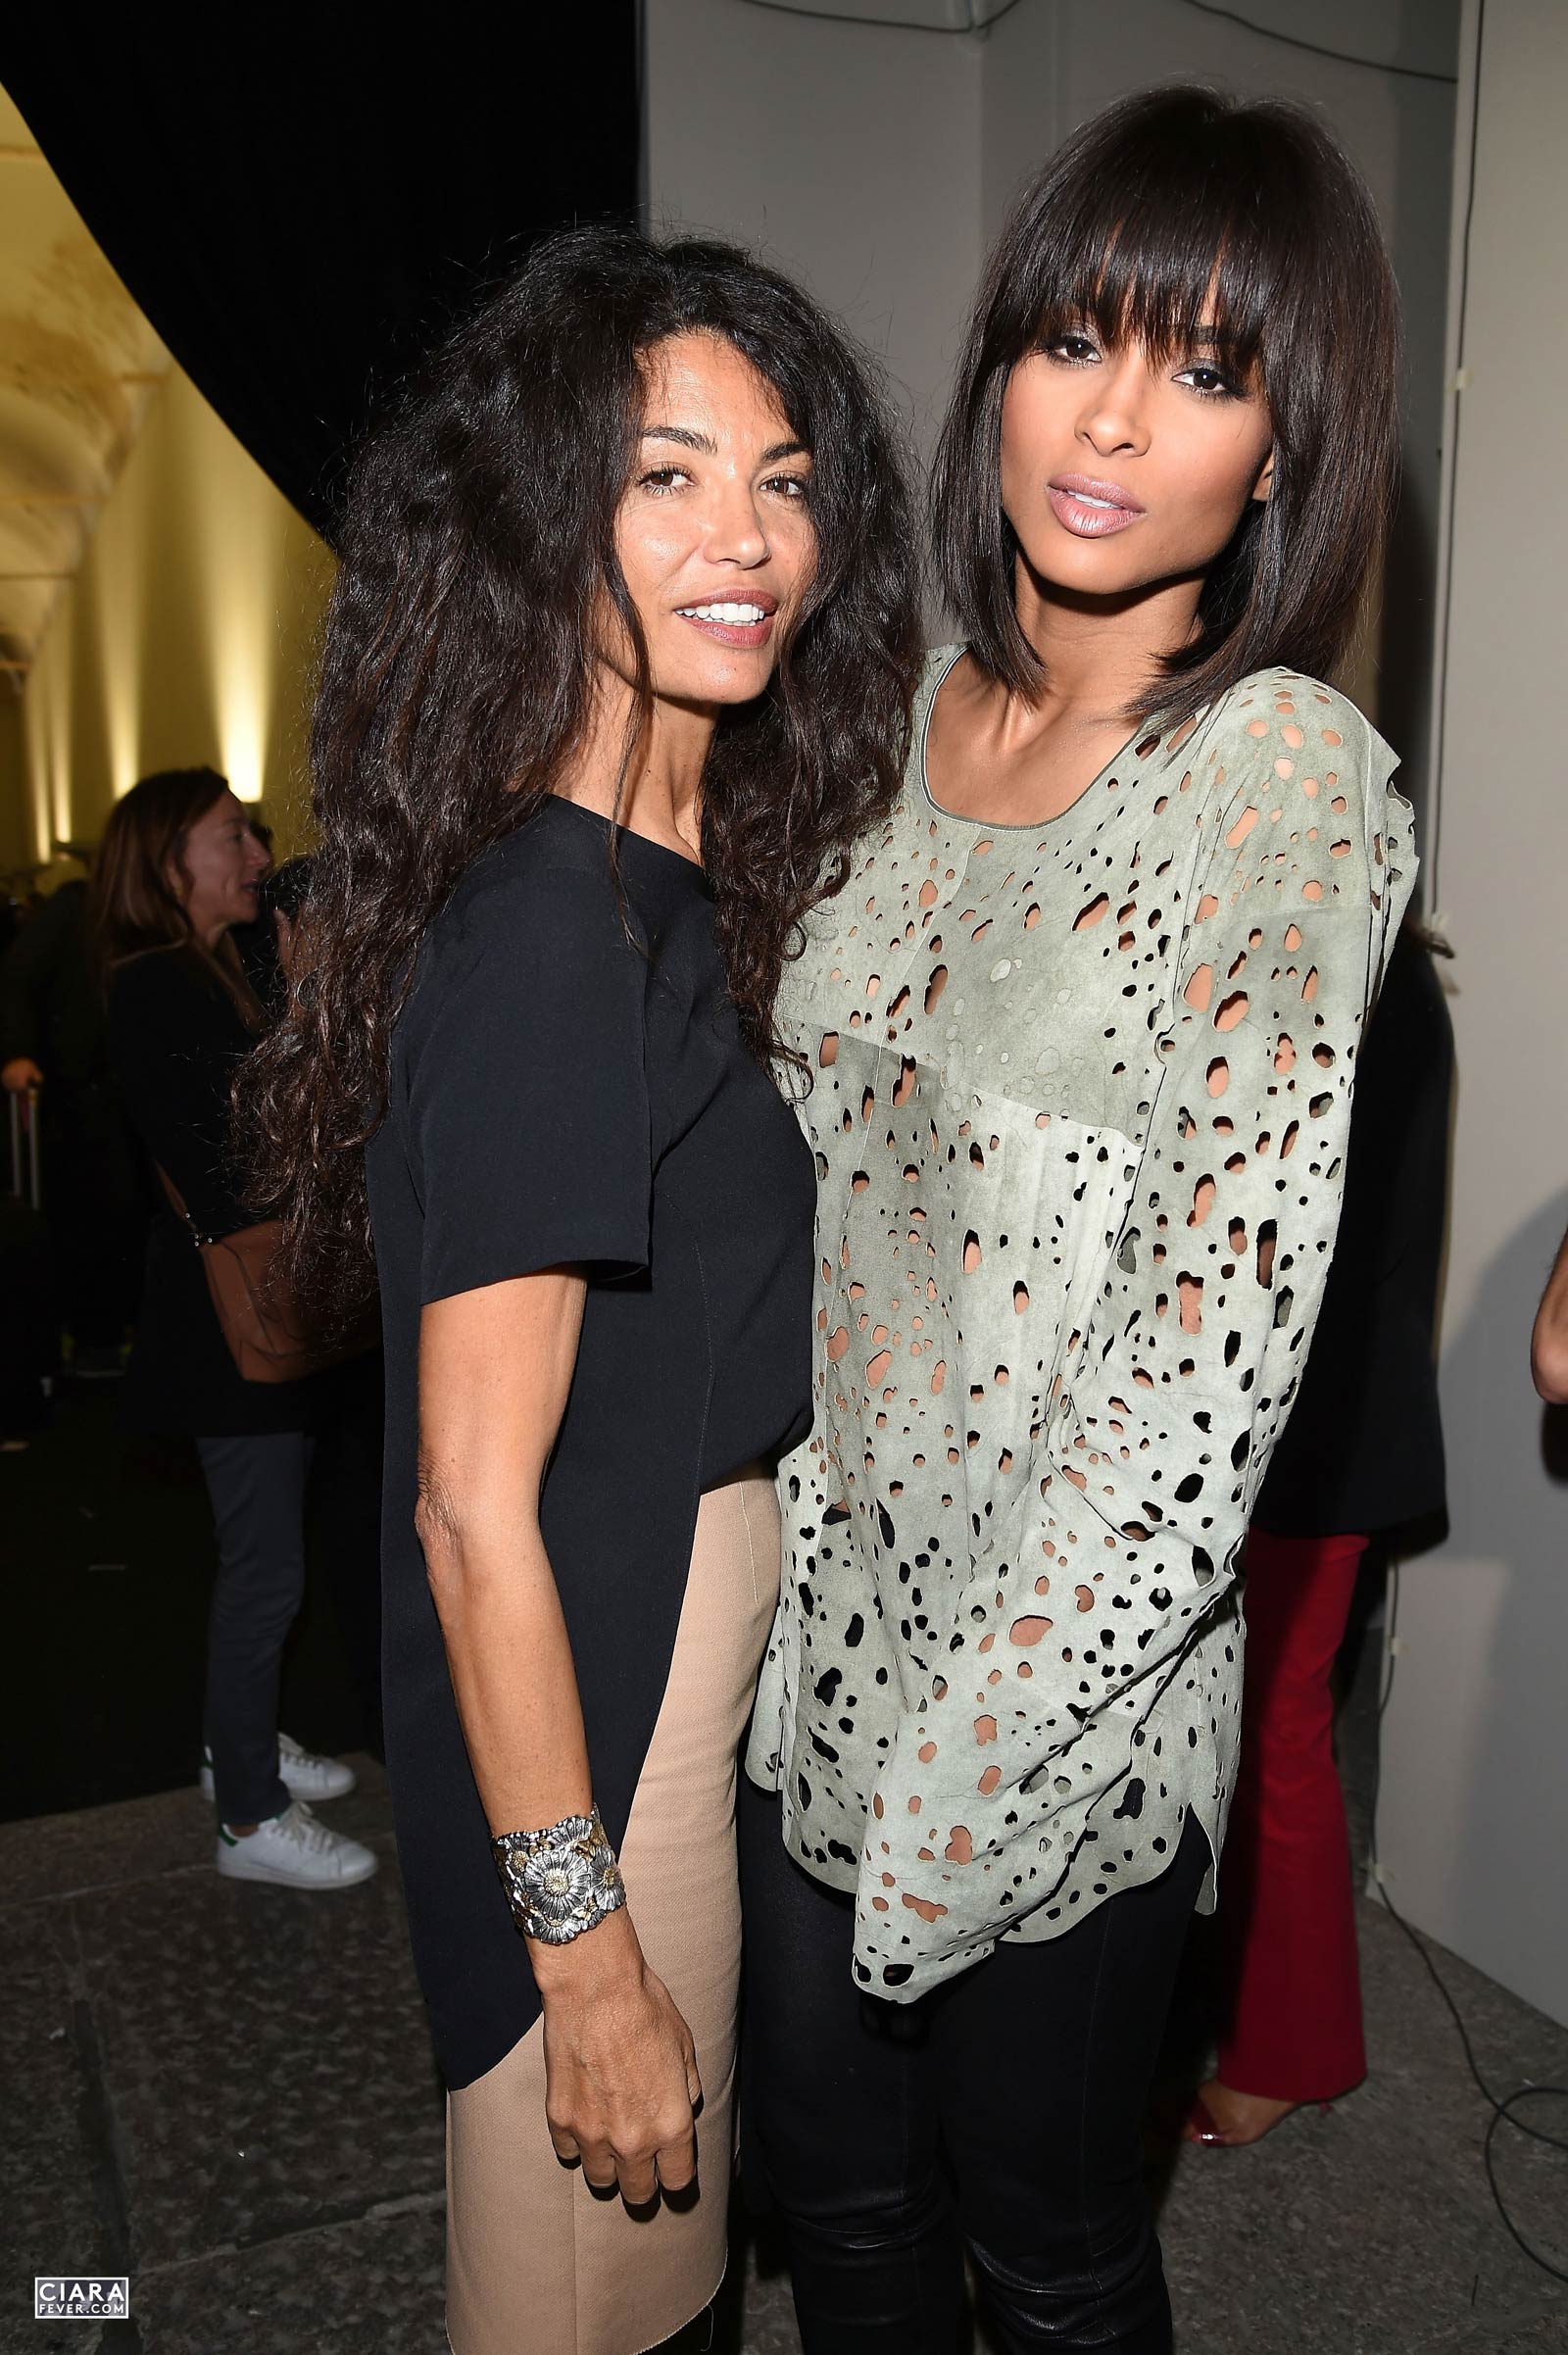 Ciara attends the Roberto Cavalli show during the Milan Fashion Week